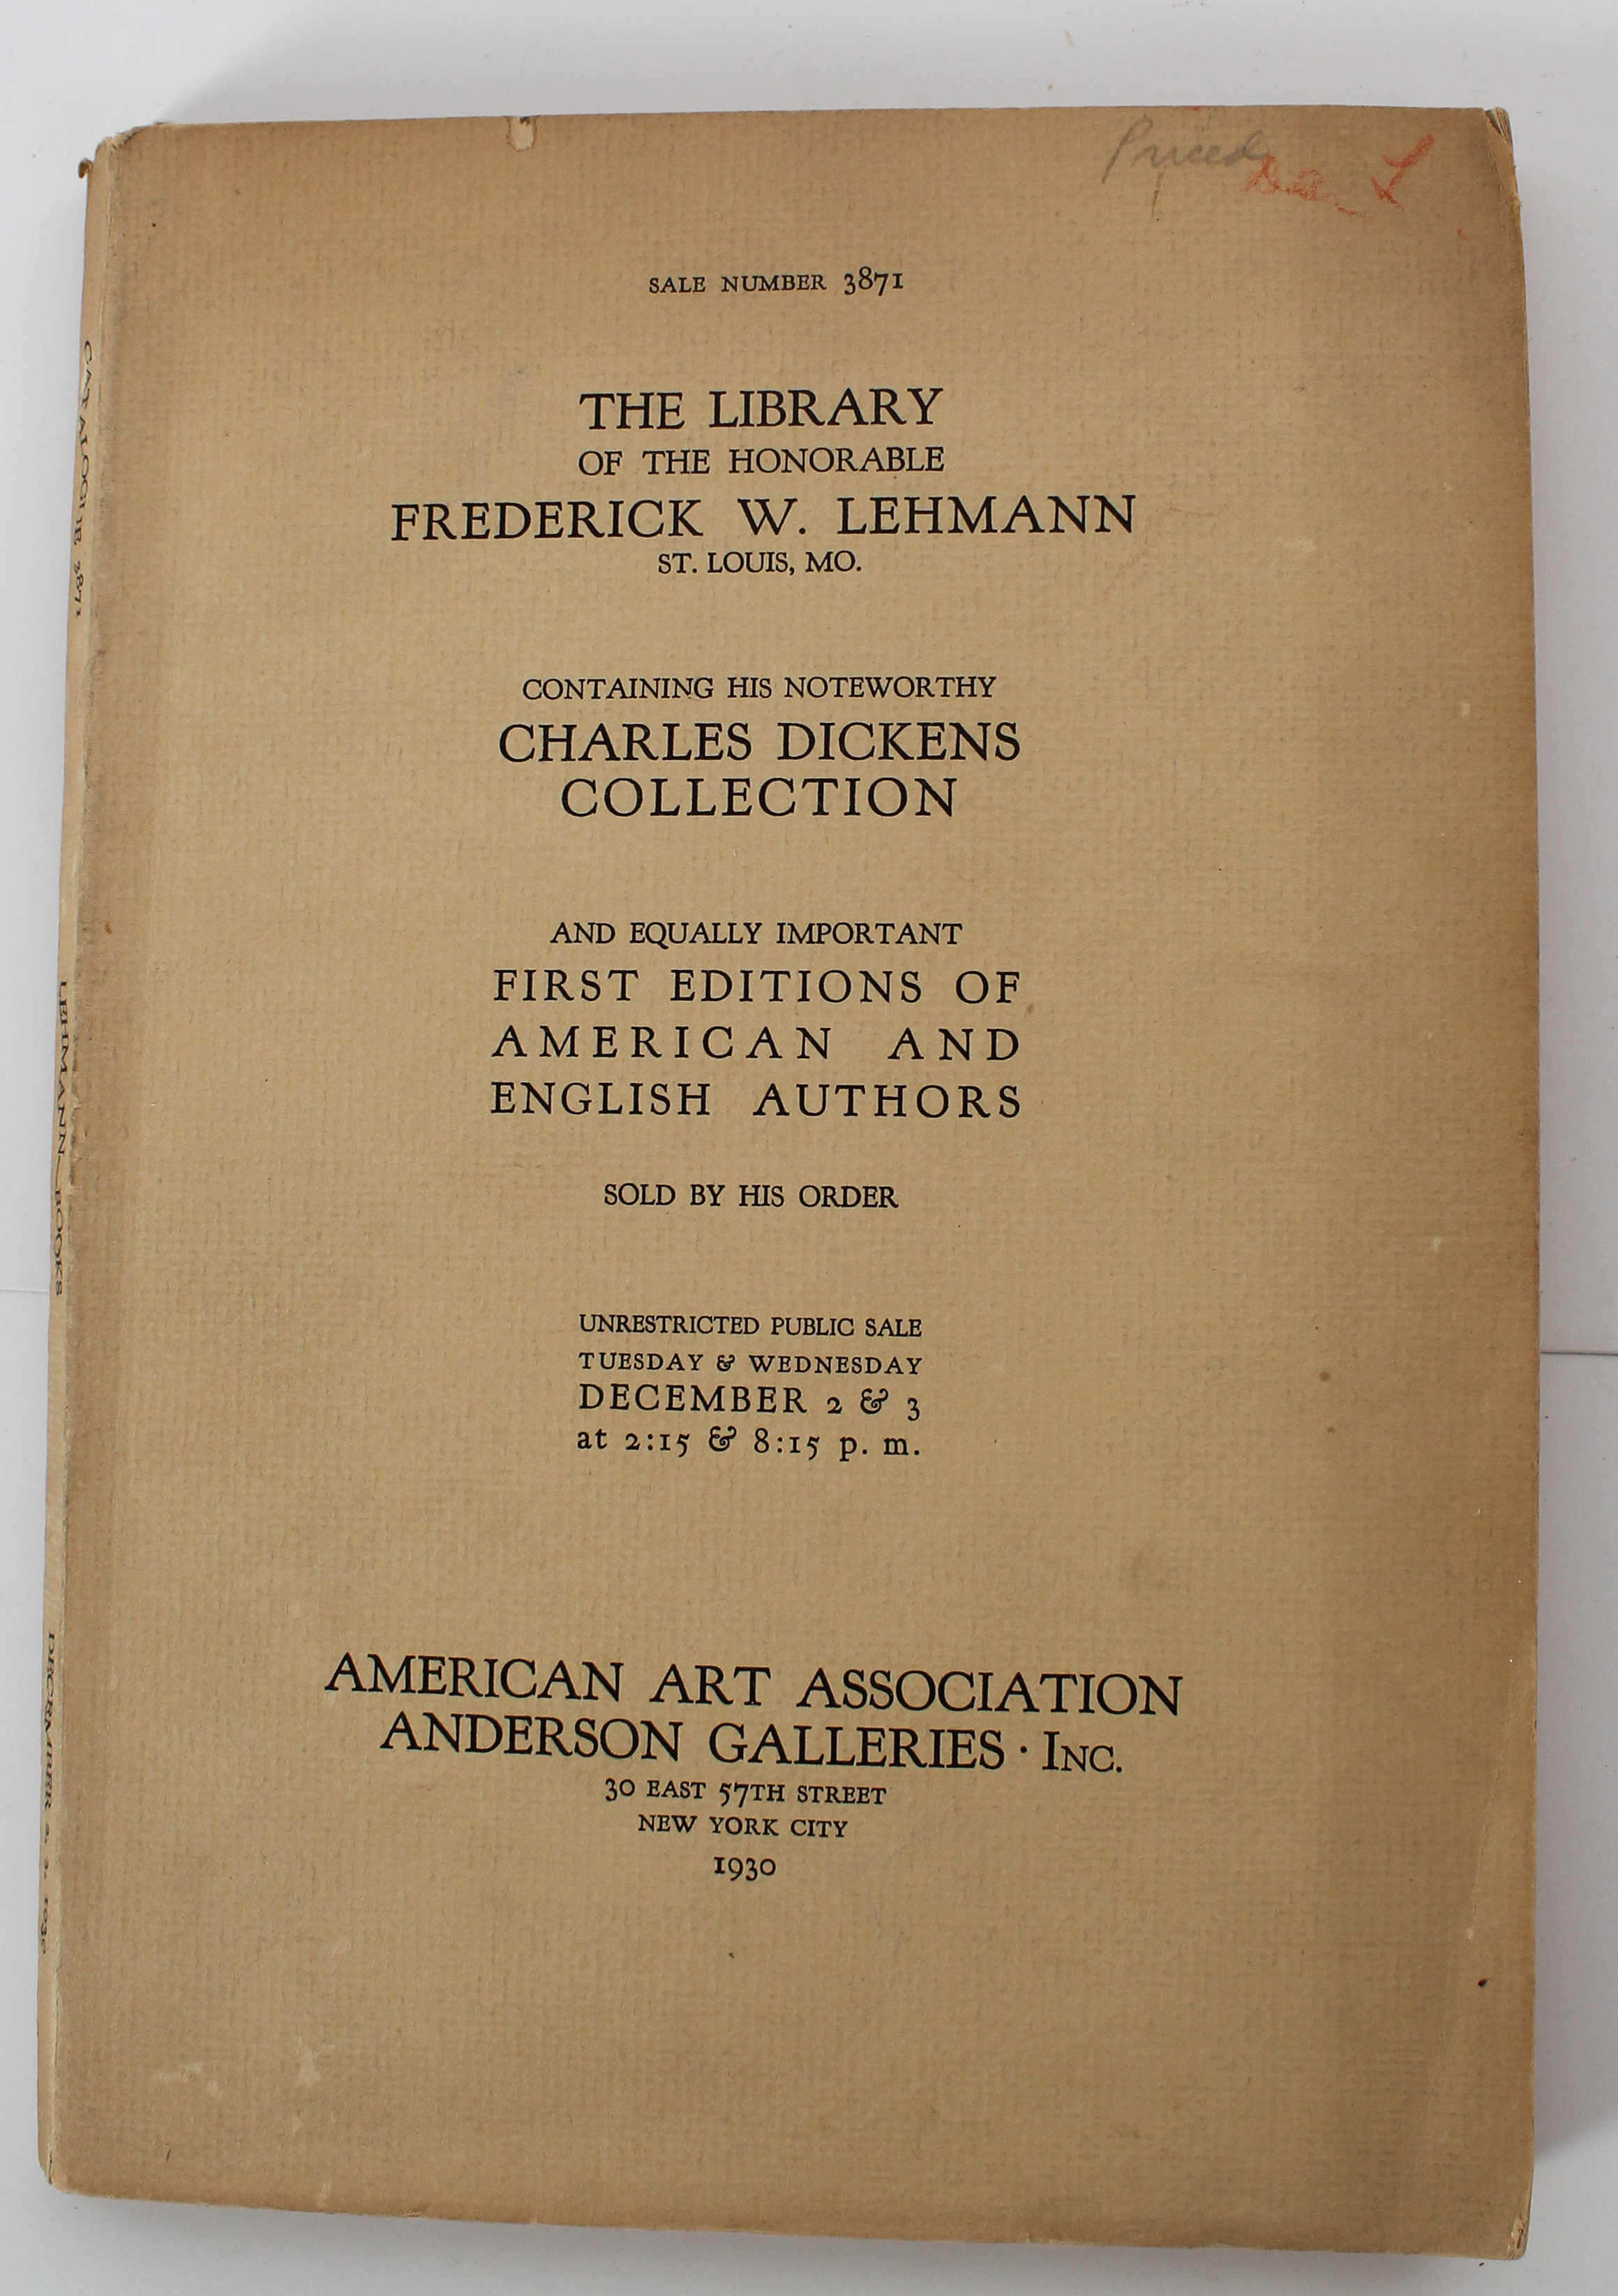 Dickens Auction Sales Catalogues 1916-1971 - Image 5 of 5